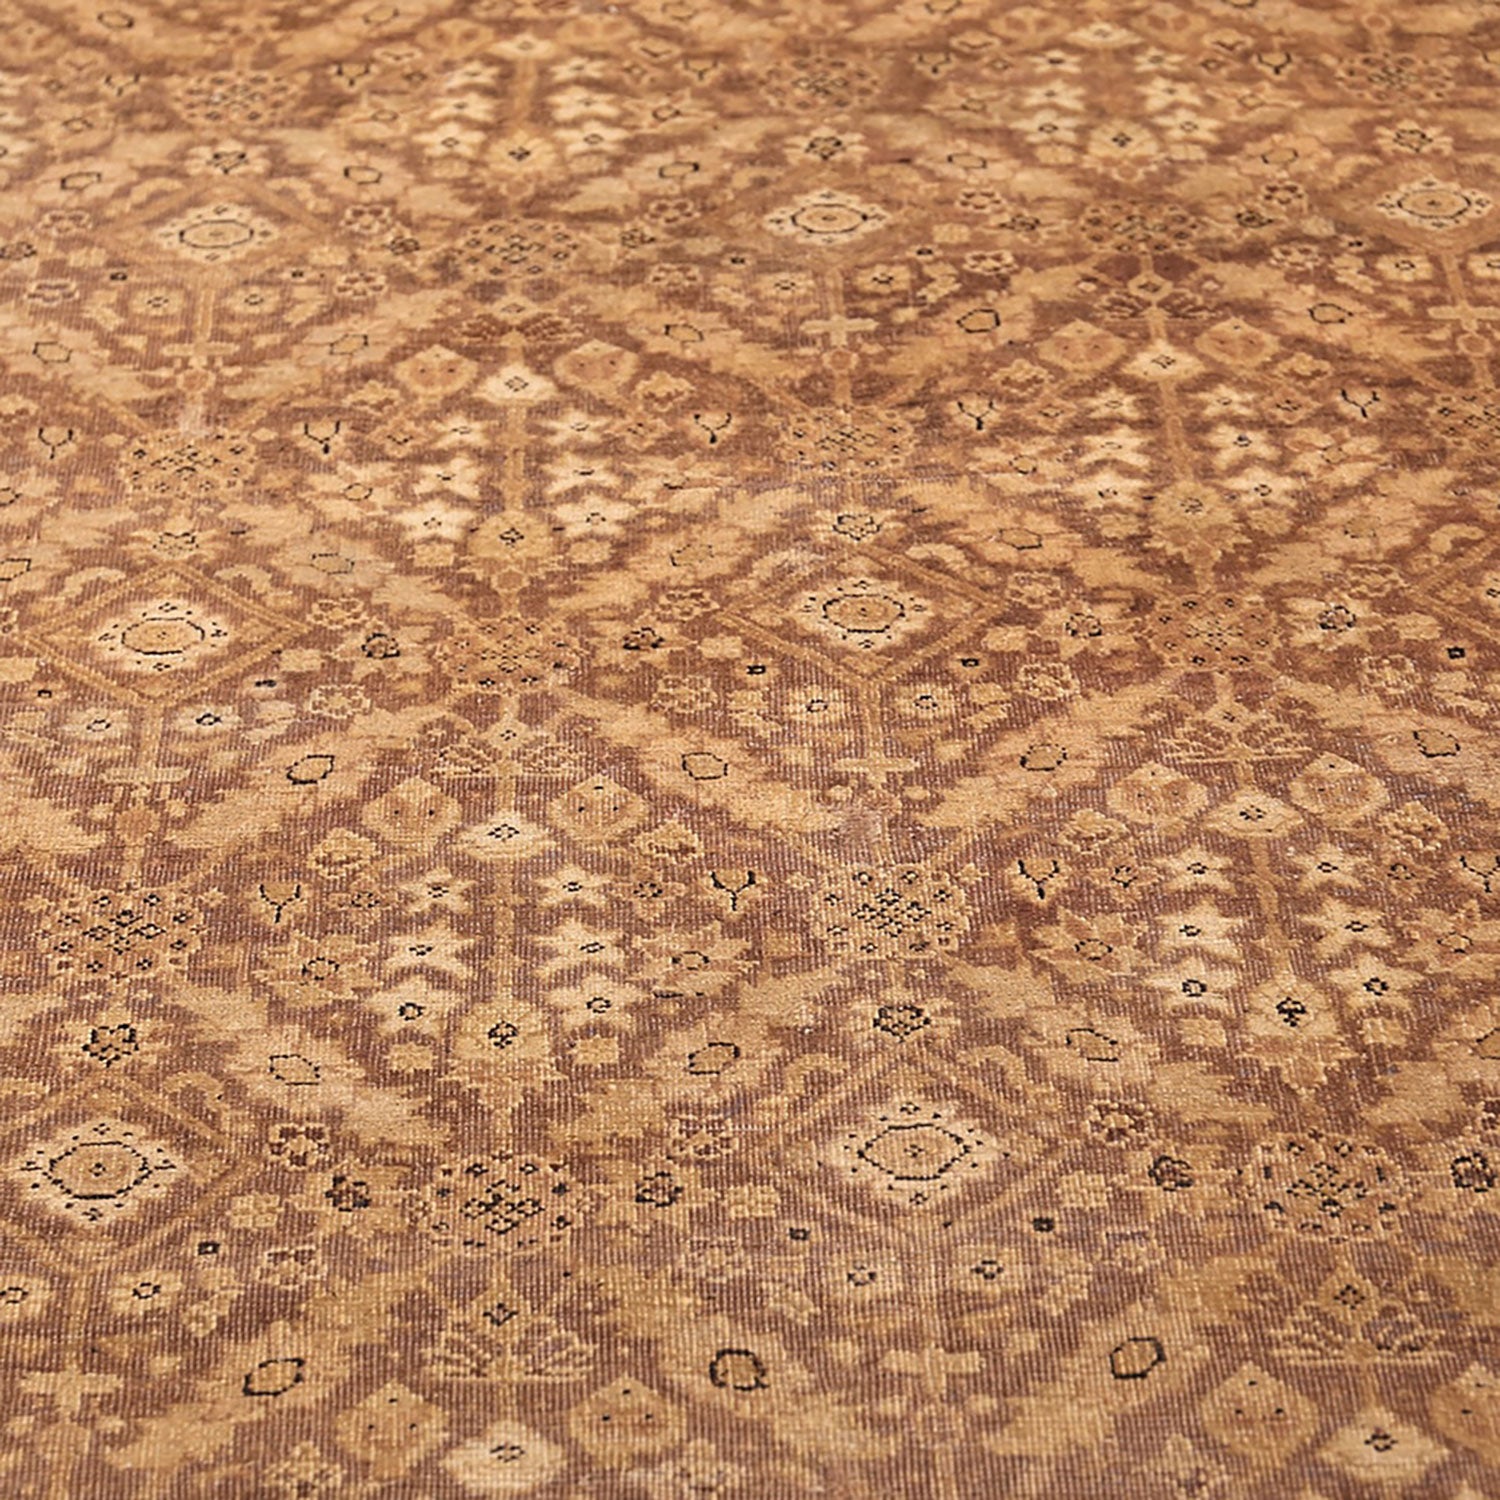 Intricate and symmetrical carpet in earthy tones with Middle Eastern-inspired design.